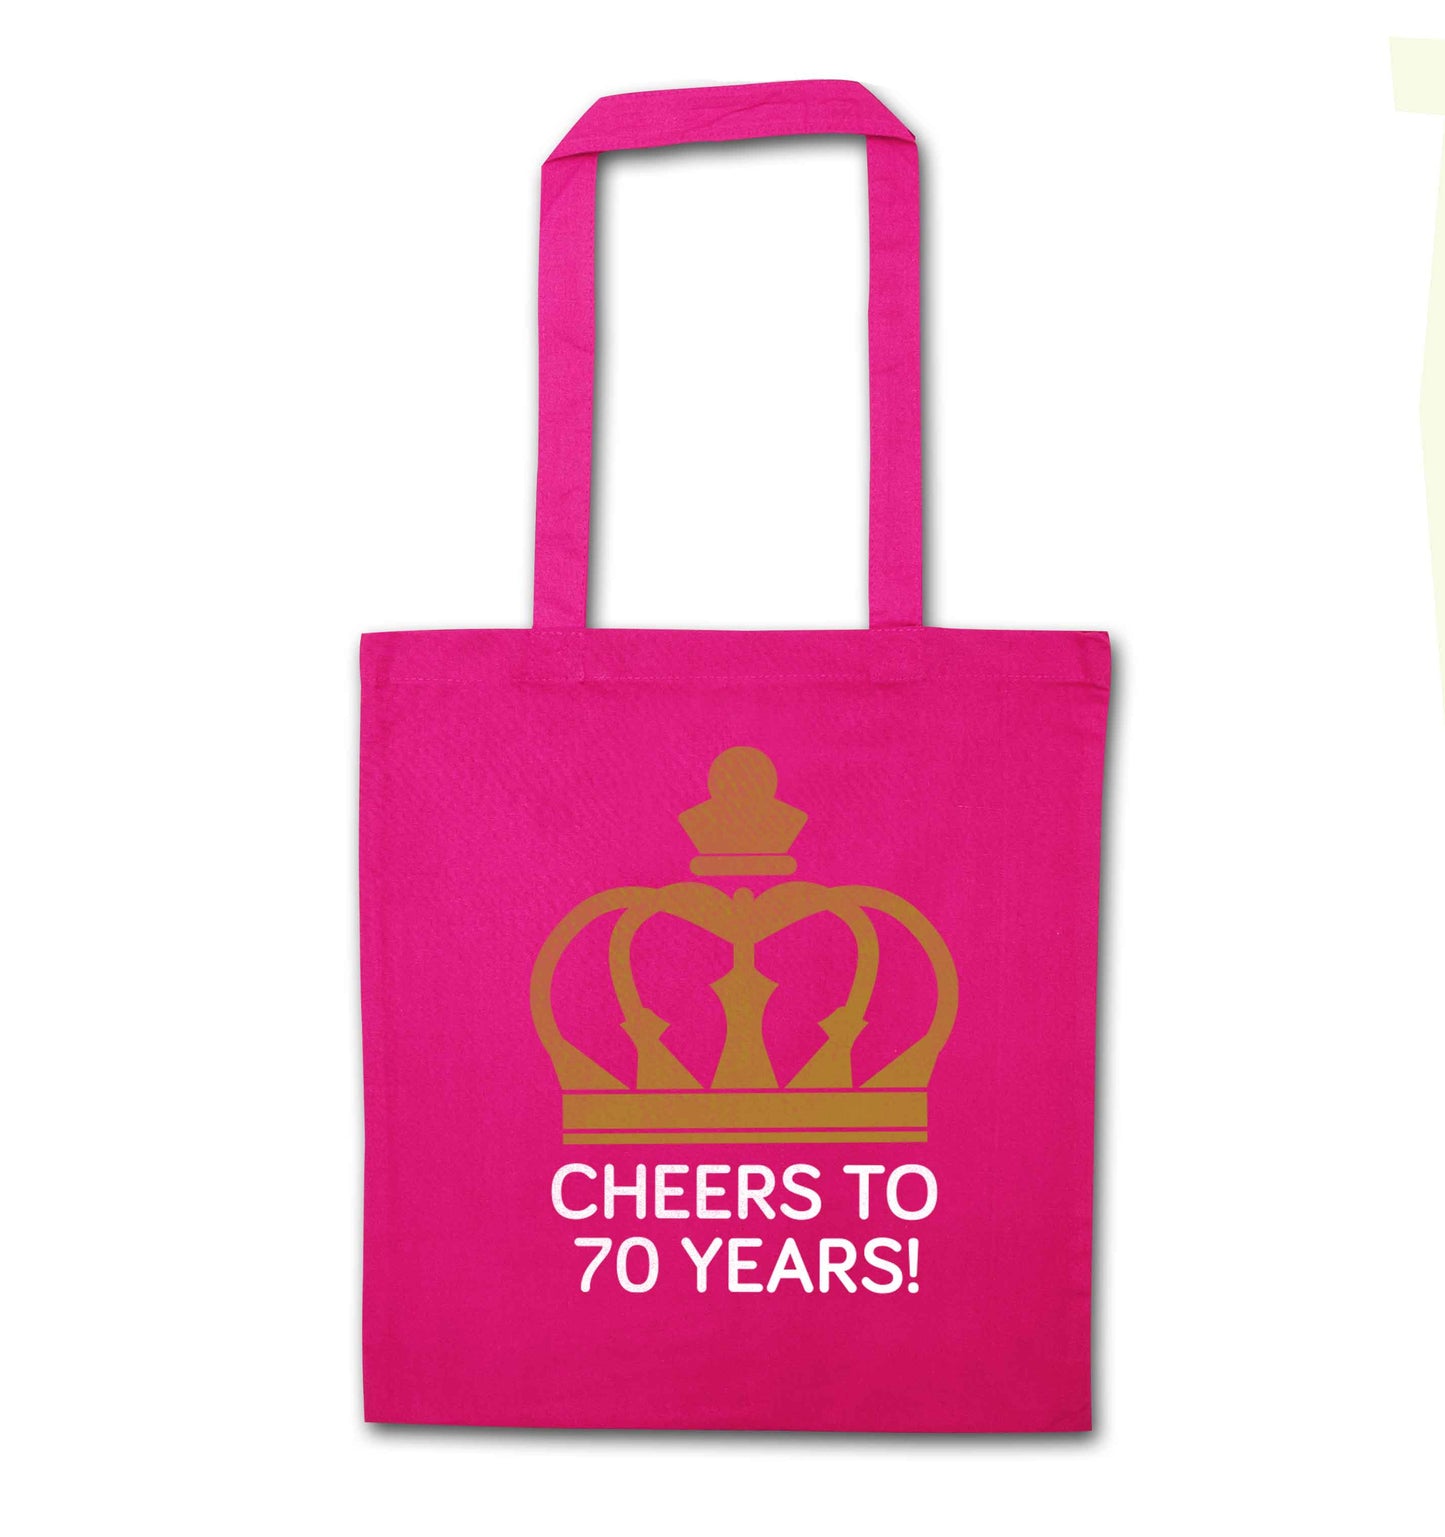 Cheers to 70 years! pink tote bag